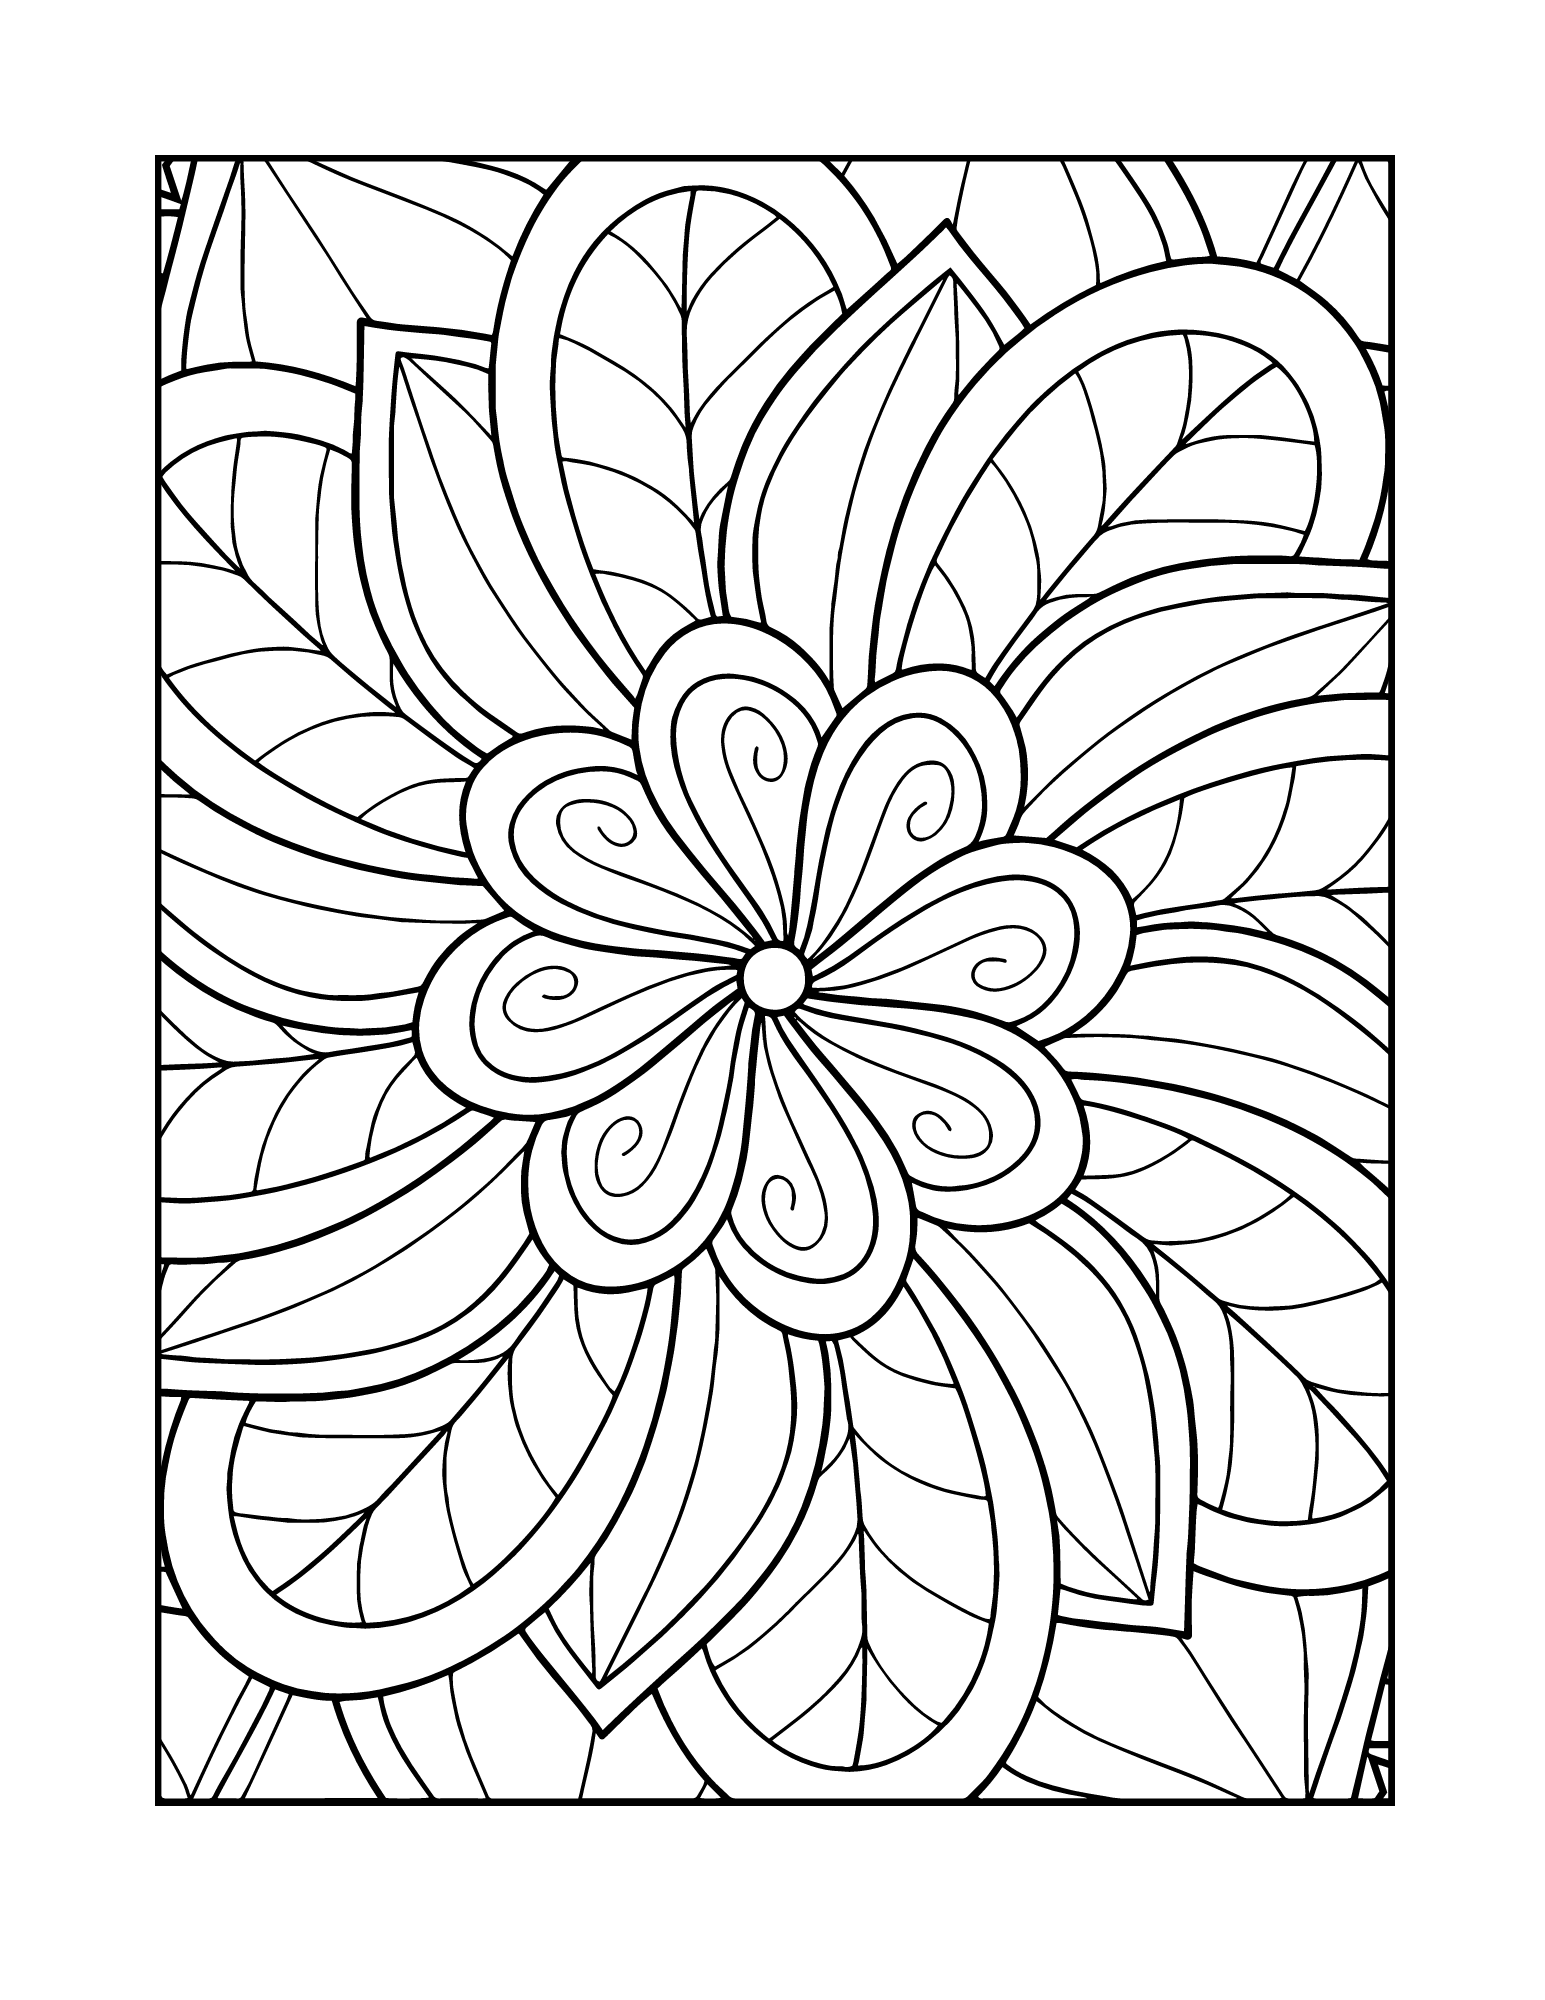 Mandala Colouring Book For Adults: Relaxing Coloring Book for